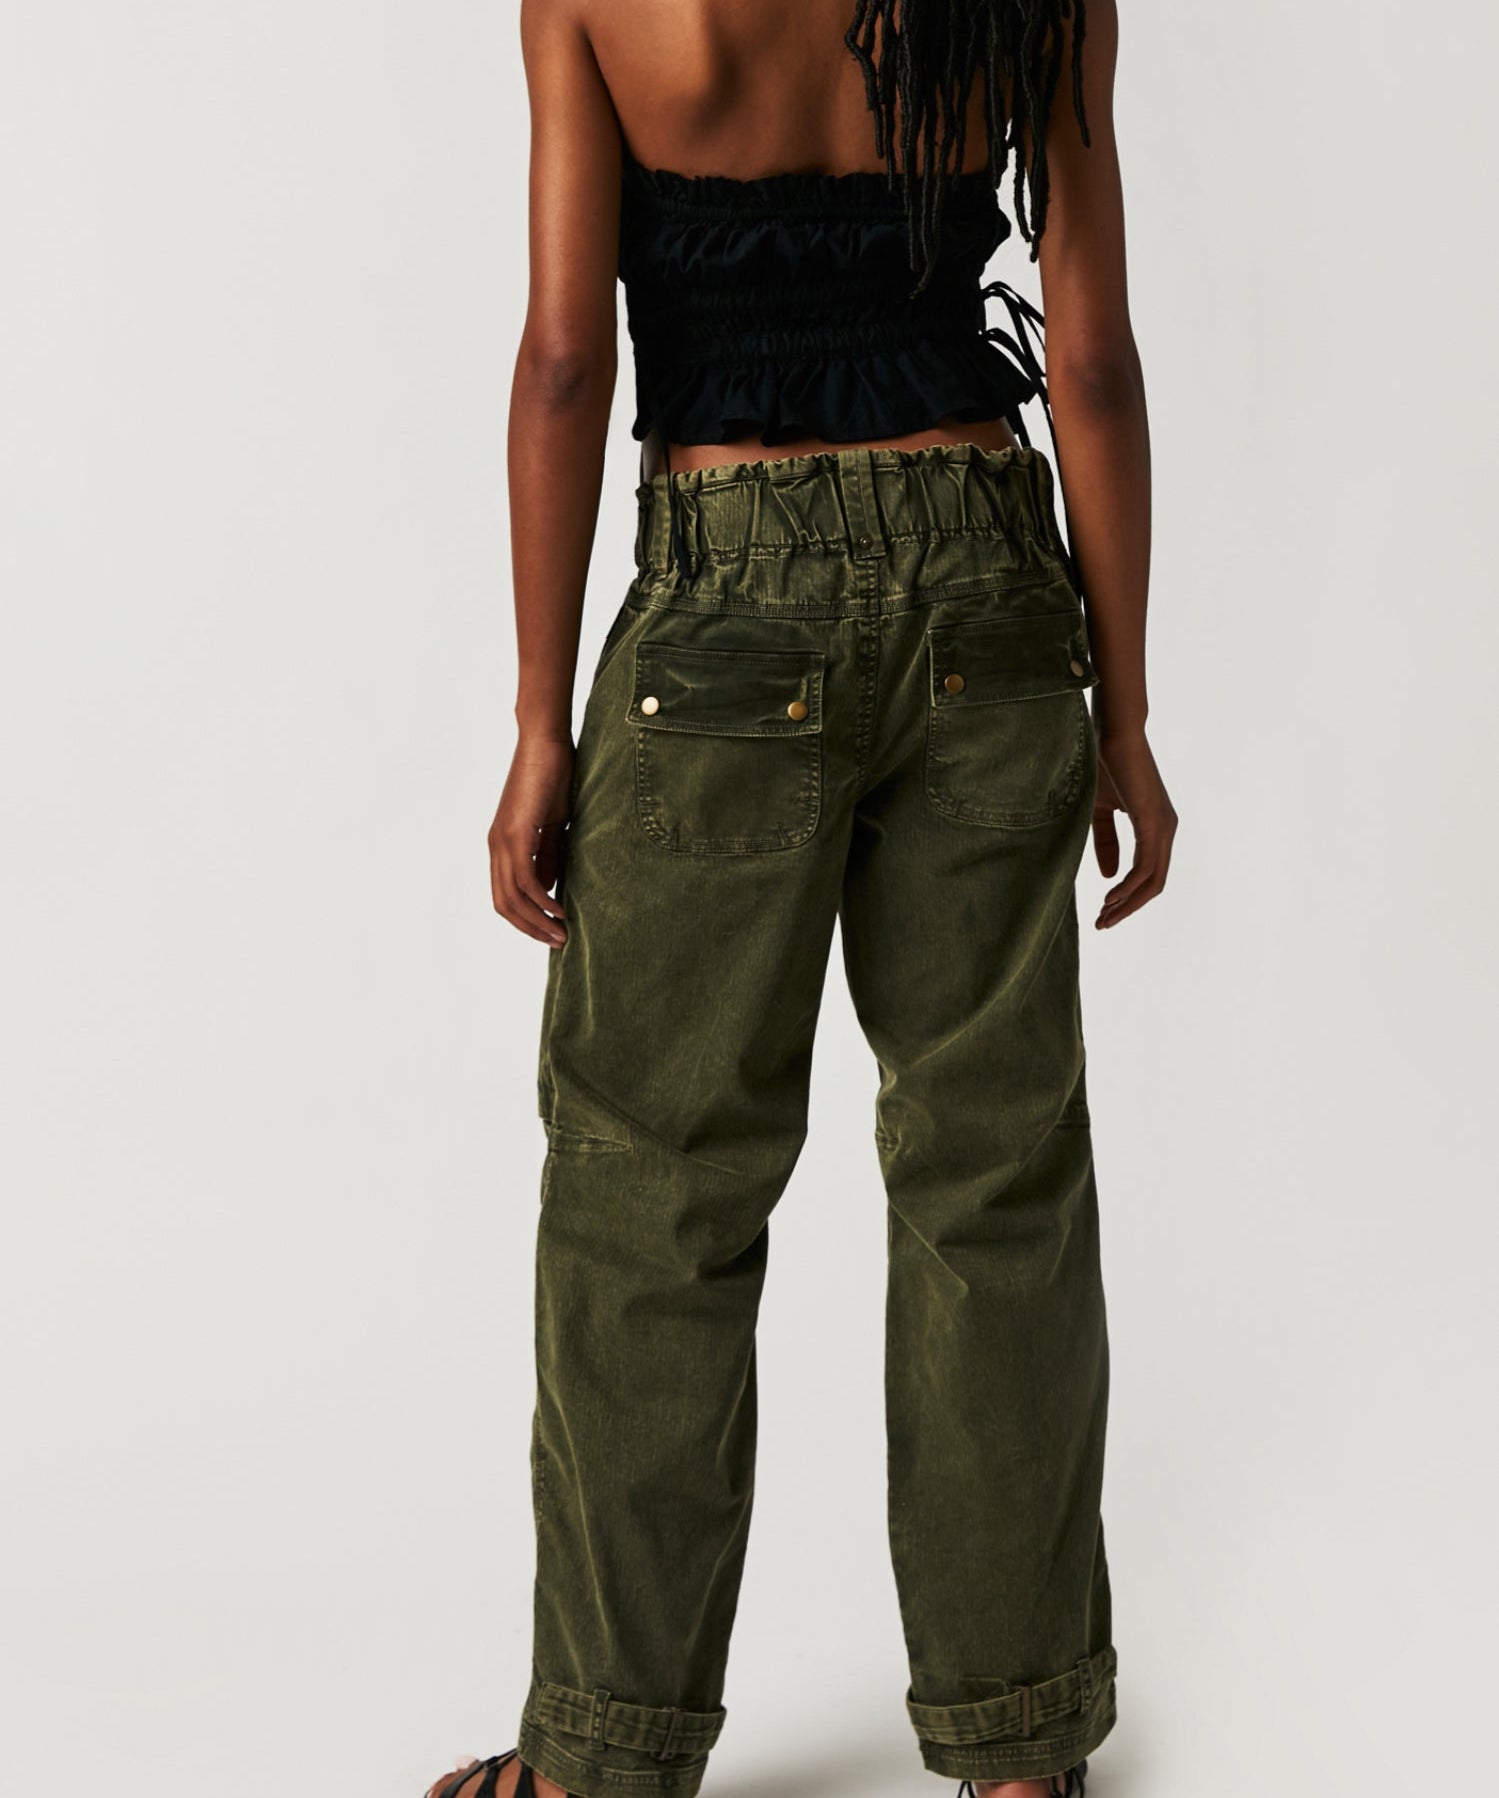 Can't Compare Slouch Pants by Free People - dusty olive - Blue Sky Fashions & Lingerie